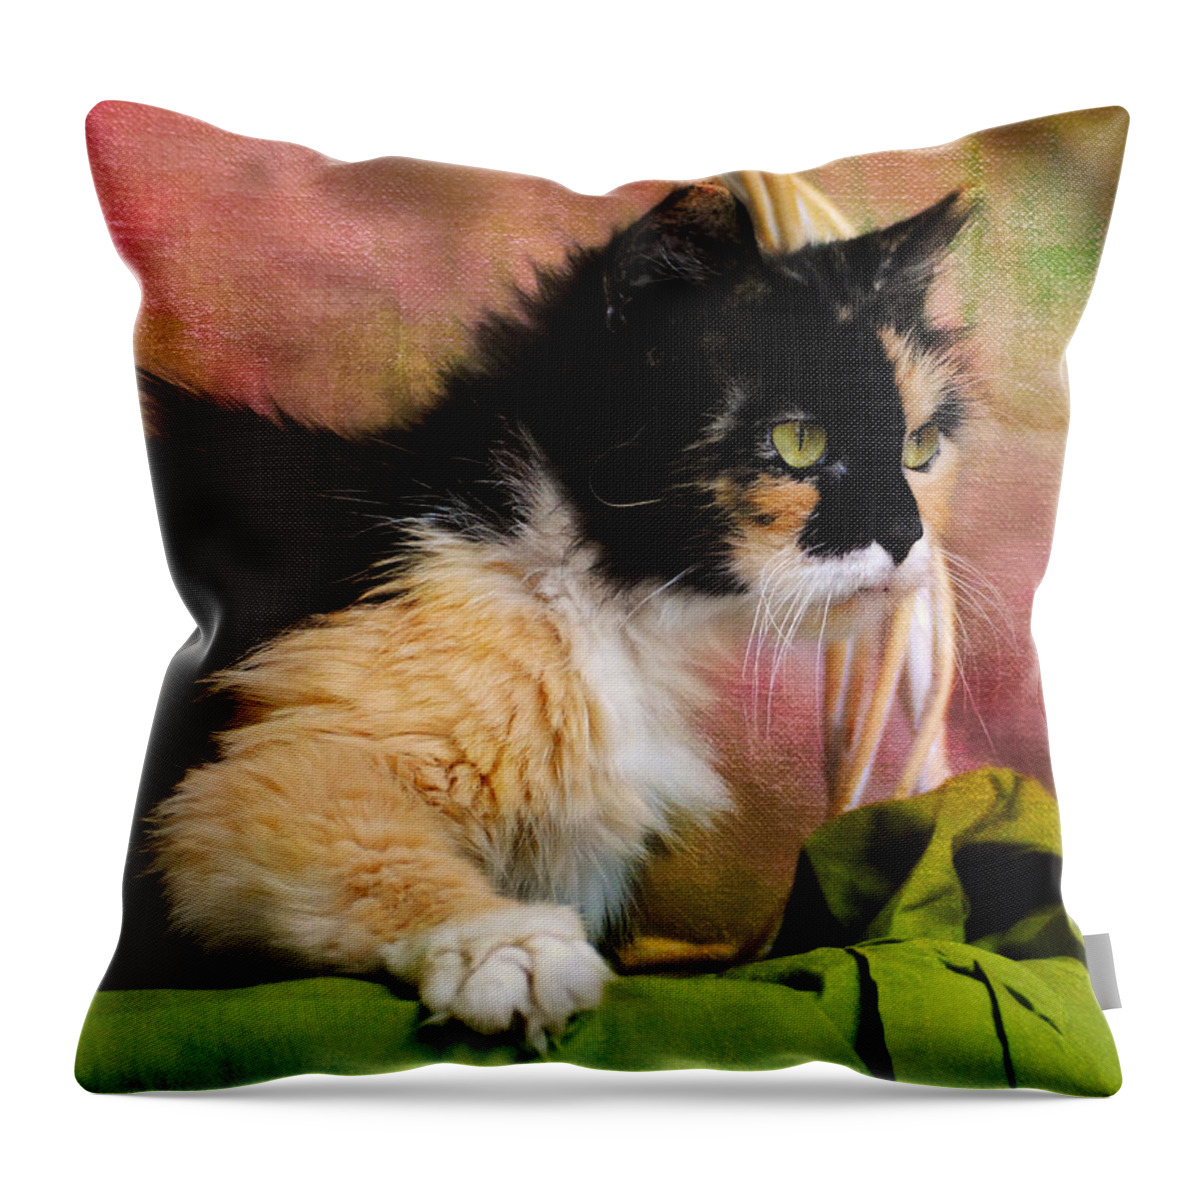 Calico Throw Pillow featuring the photograph Calico Cat in Basket by Jai Johnson